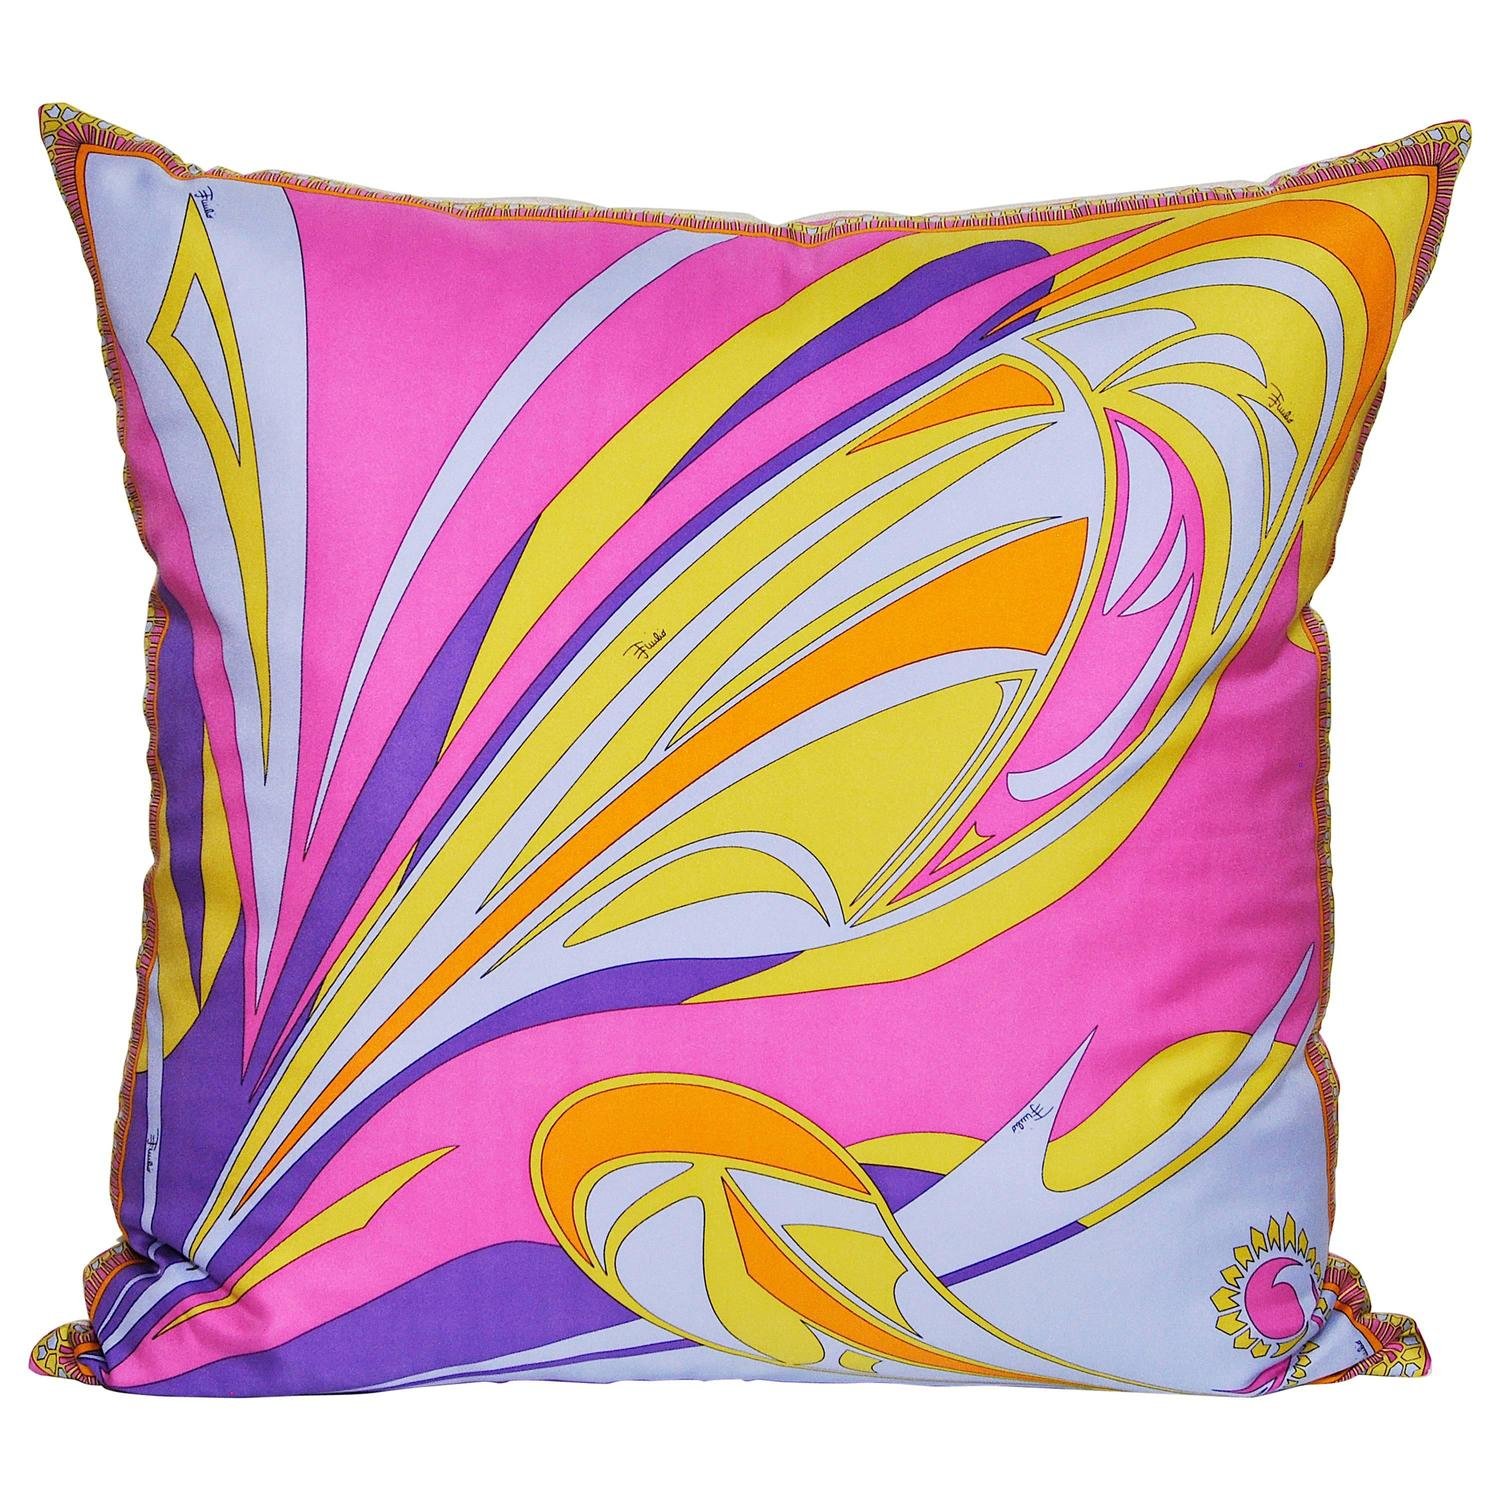 Katie Larmour Linen, Vintage Pucci Silk Scarf backed in Pure Irish Linen, Belfast Antique Dealer, Couture Cushions Pillows Interior Decor, Northern Ireland, sustainability, purple pink yellow.jpg